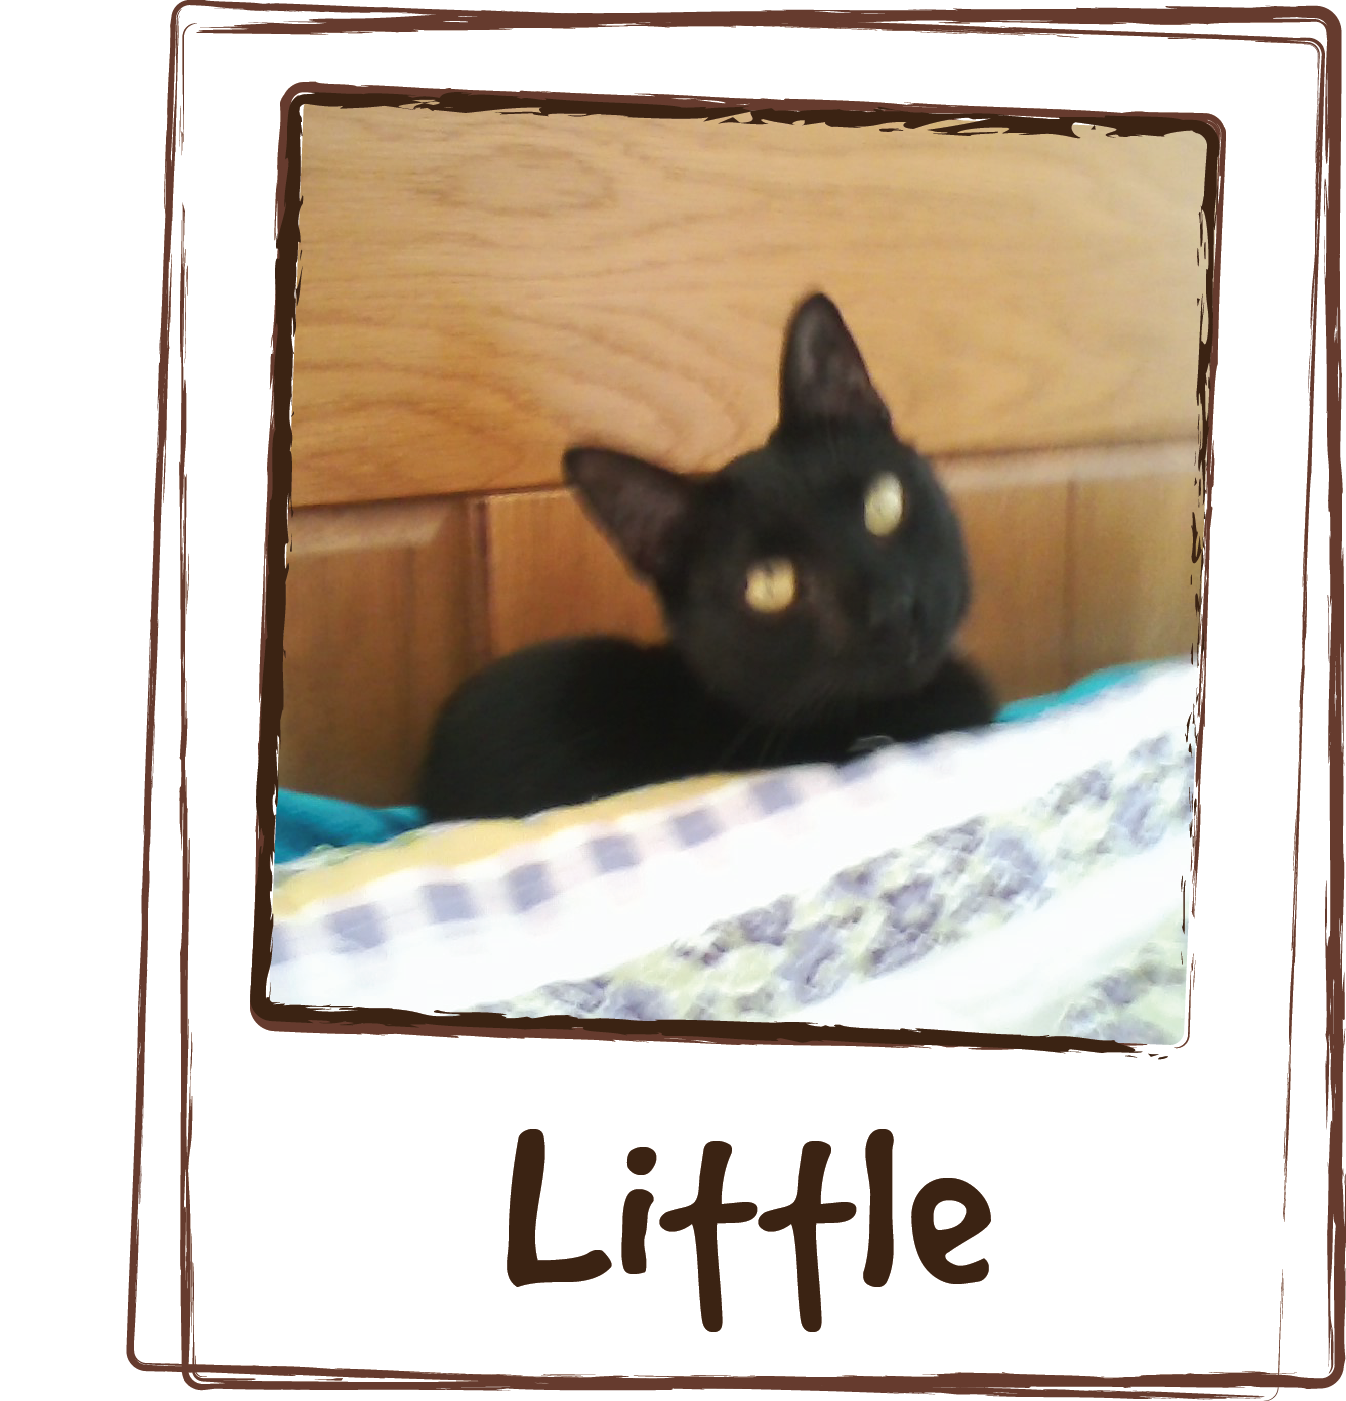  “Little was a premature baby and has ADD. He gets really going fast and can't stop. When he was a baby we just didn't know what we were going to do because he was so small and frail. We tried everything with the Vet and nothing helped until we found